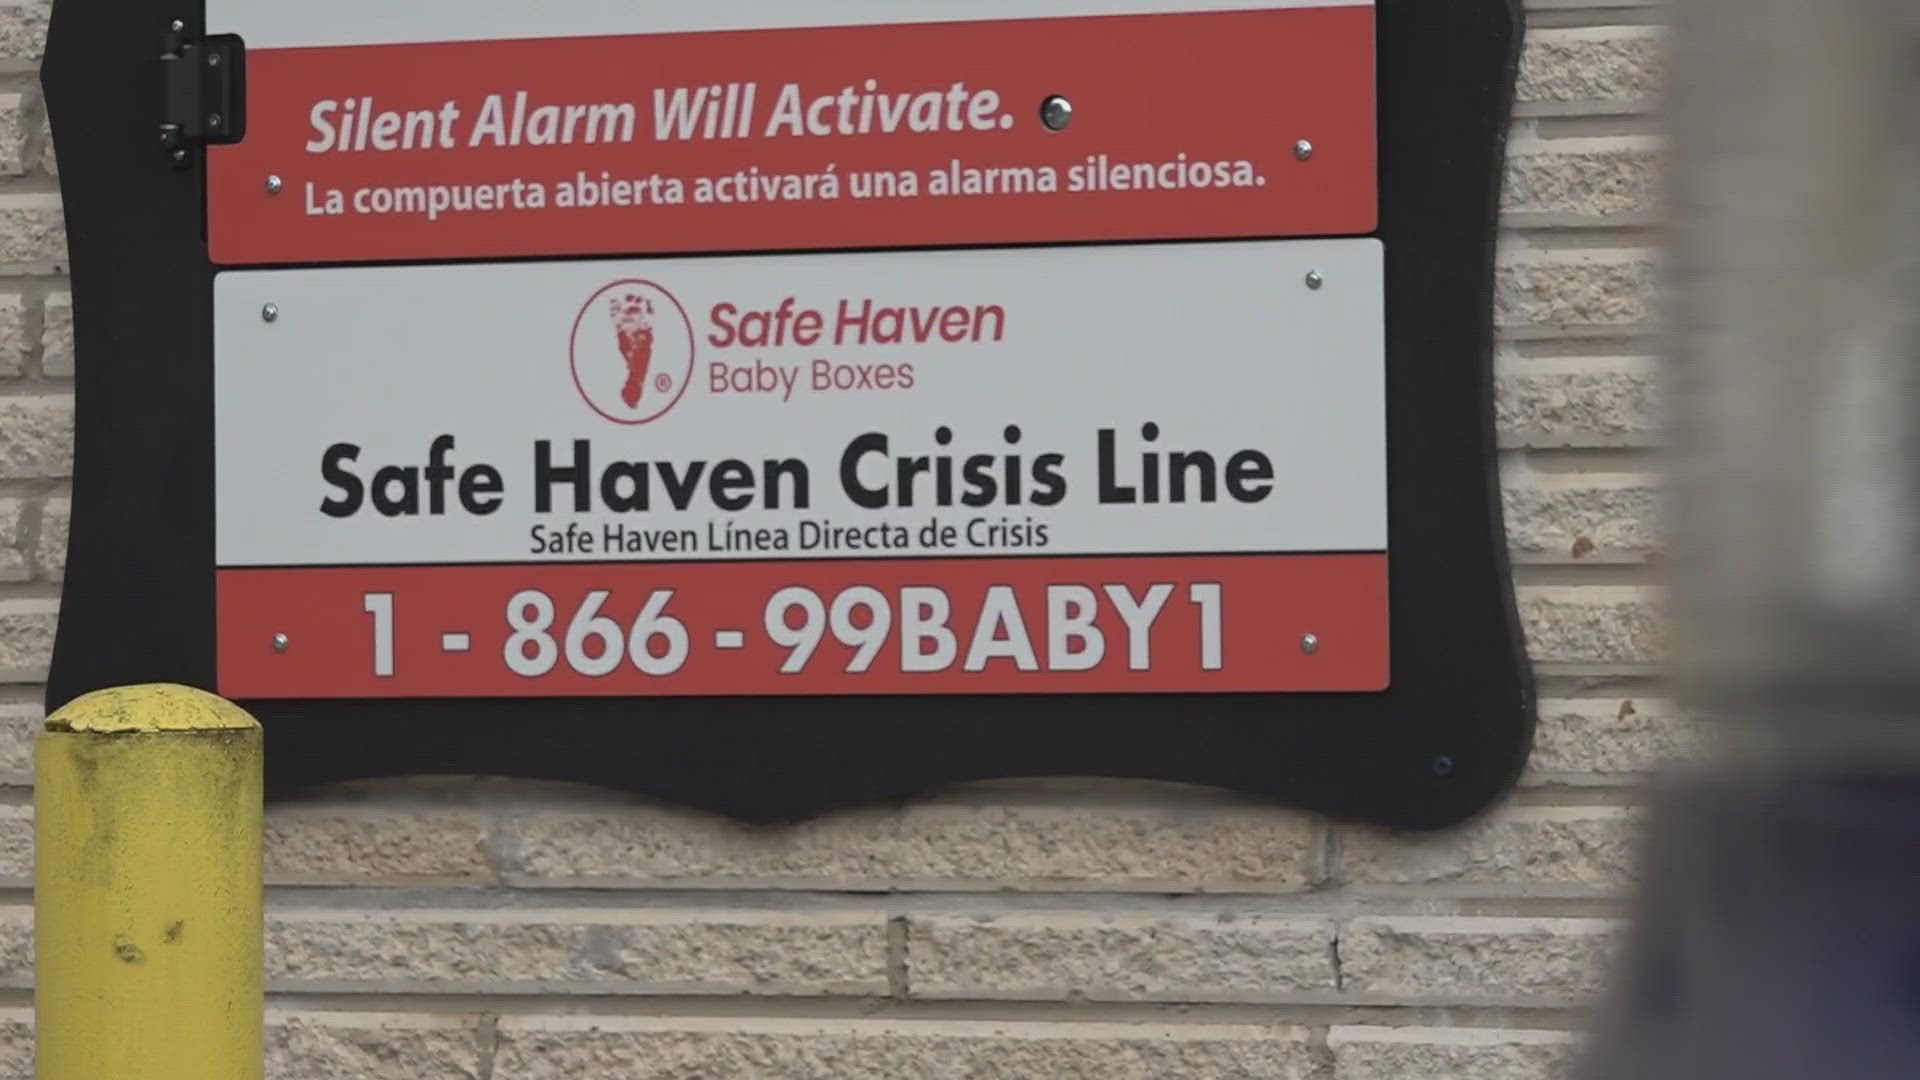 Early Saturday morning, the Knoxville Fire Department received a "Baby Box Alert" for the first time.